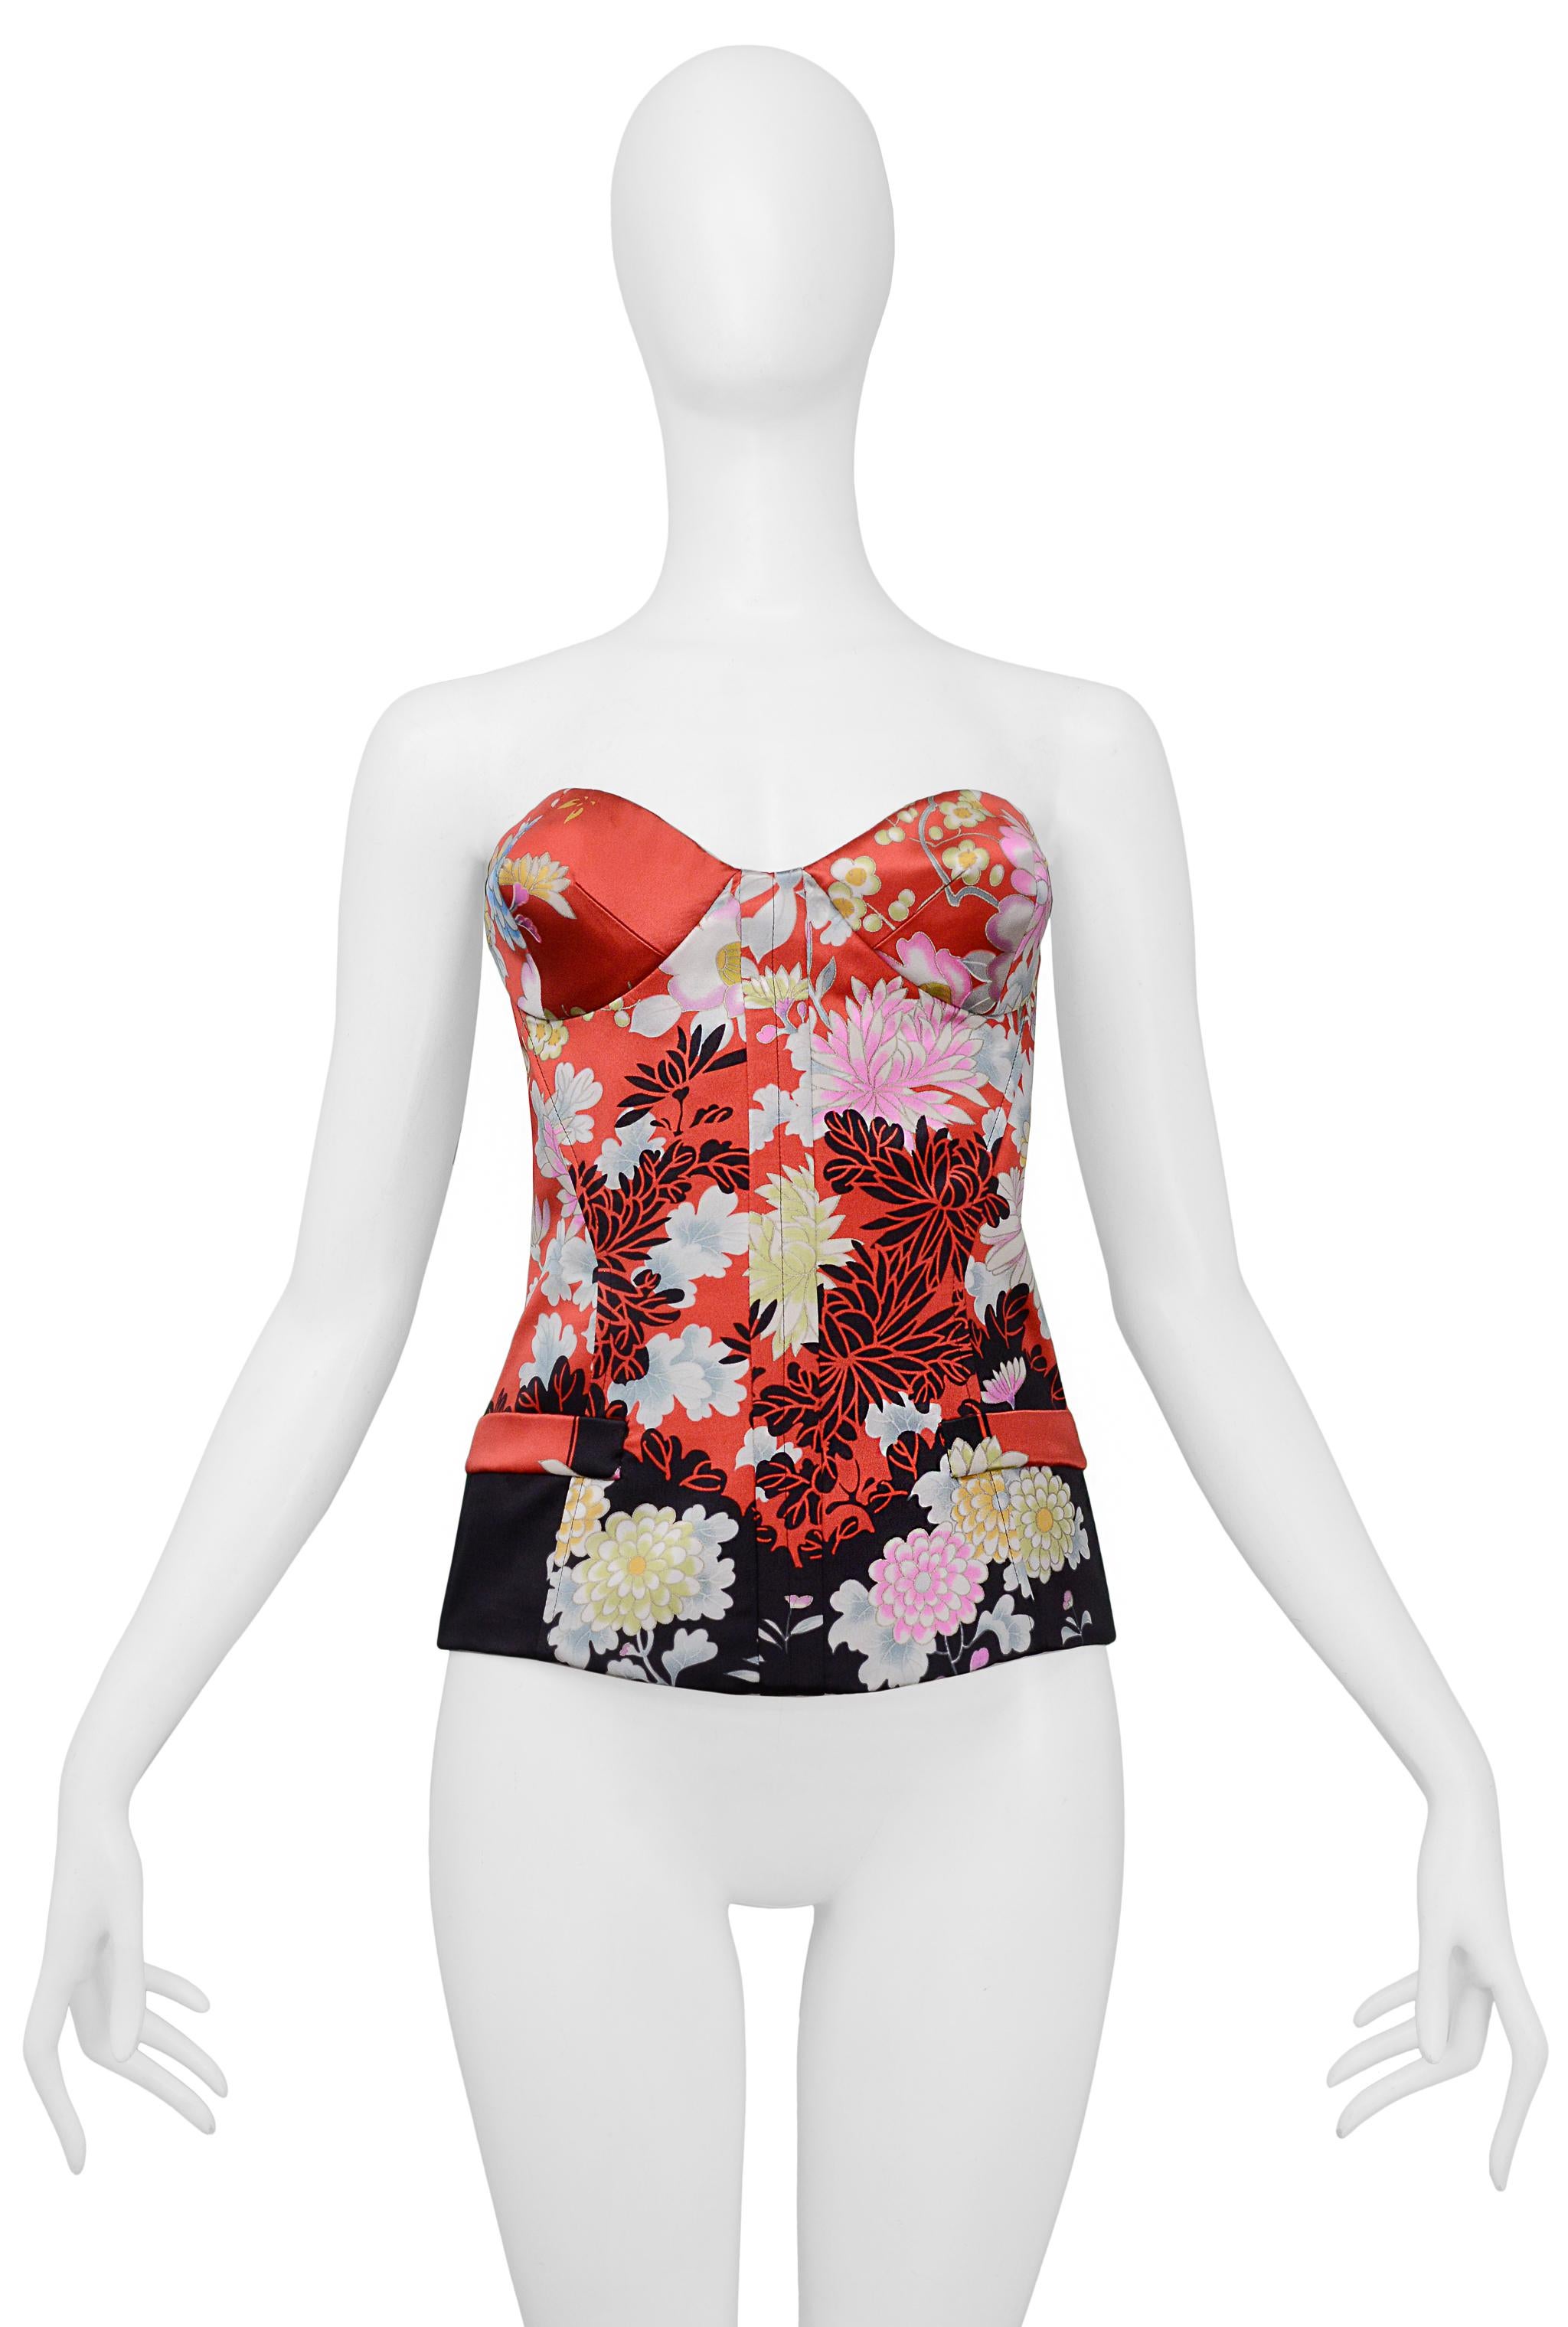 Resurrection Vintage is excited to present a vintage Roberto Cavalli red satin corset top featuring floral obi-style fabric, center snap and hook and eye closures, side pockets, and bustier detailing at the bust. 

Roberto Cavalli
Size: 40
Silk